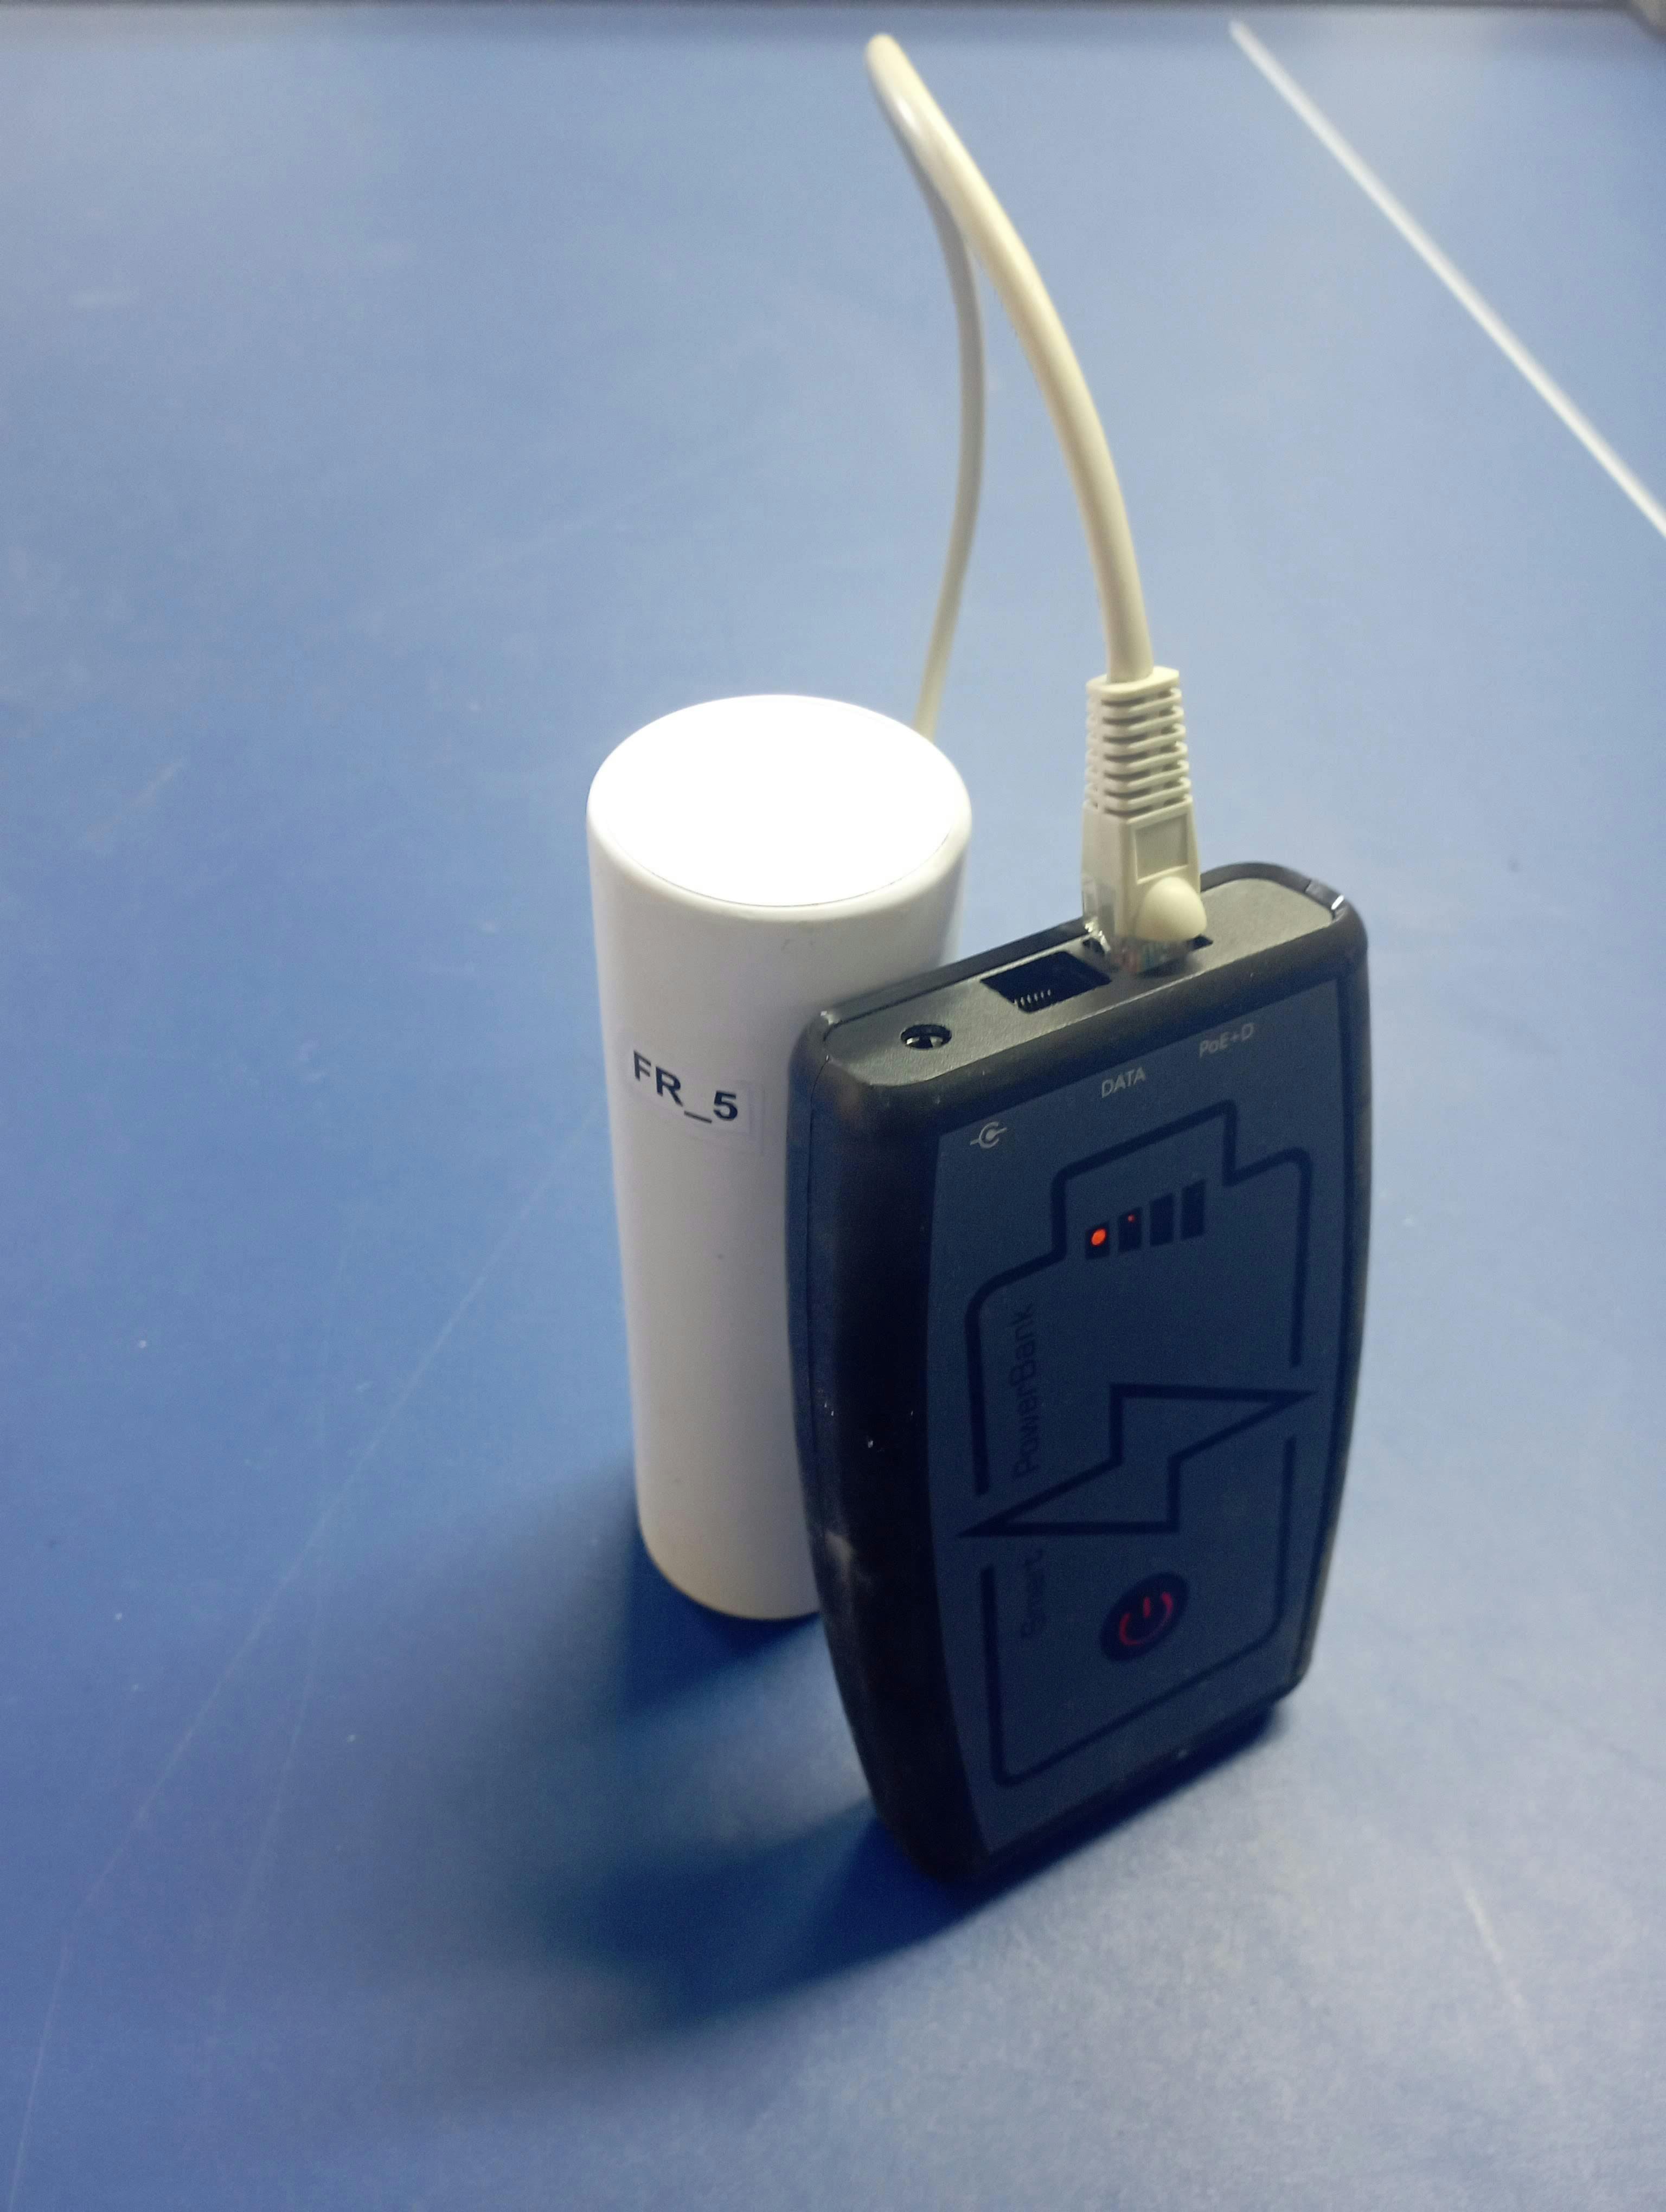 A picture illustrating a range extender with power bank 